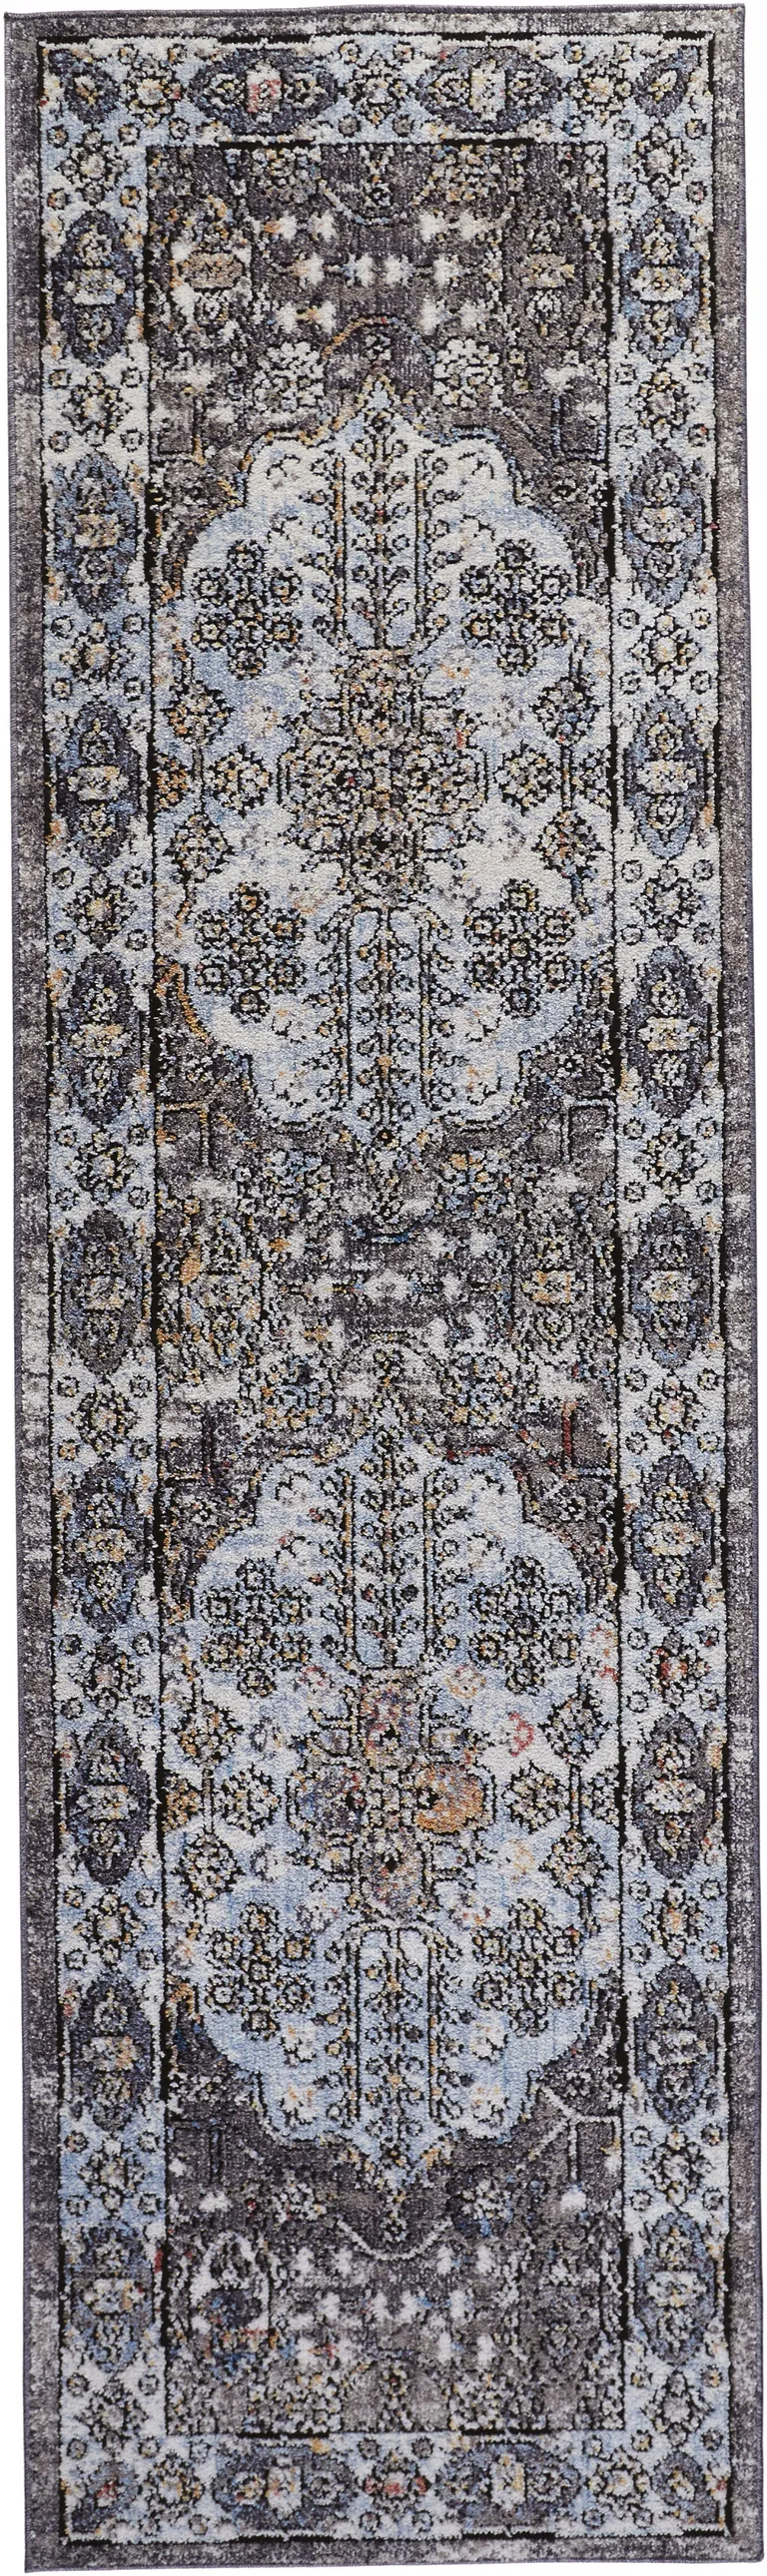 8' Gray Blue And Gold Floral Stain Resistant Runner Rug Photo 1